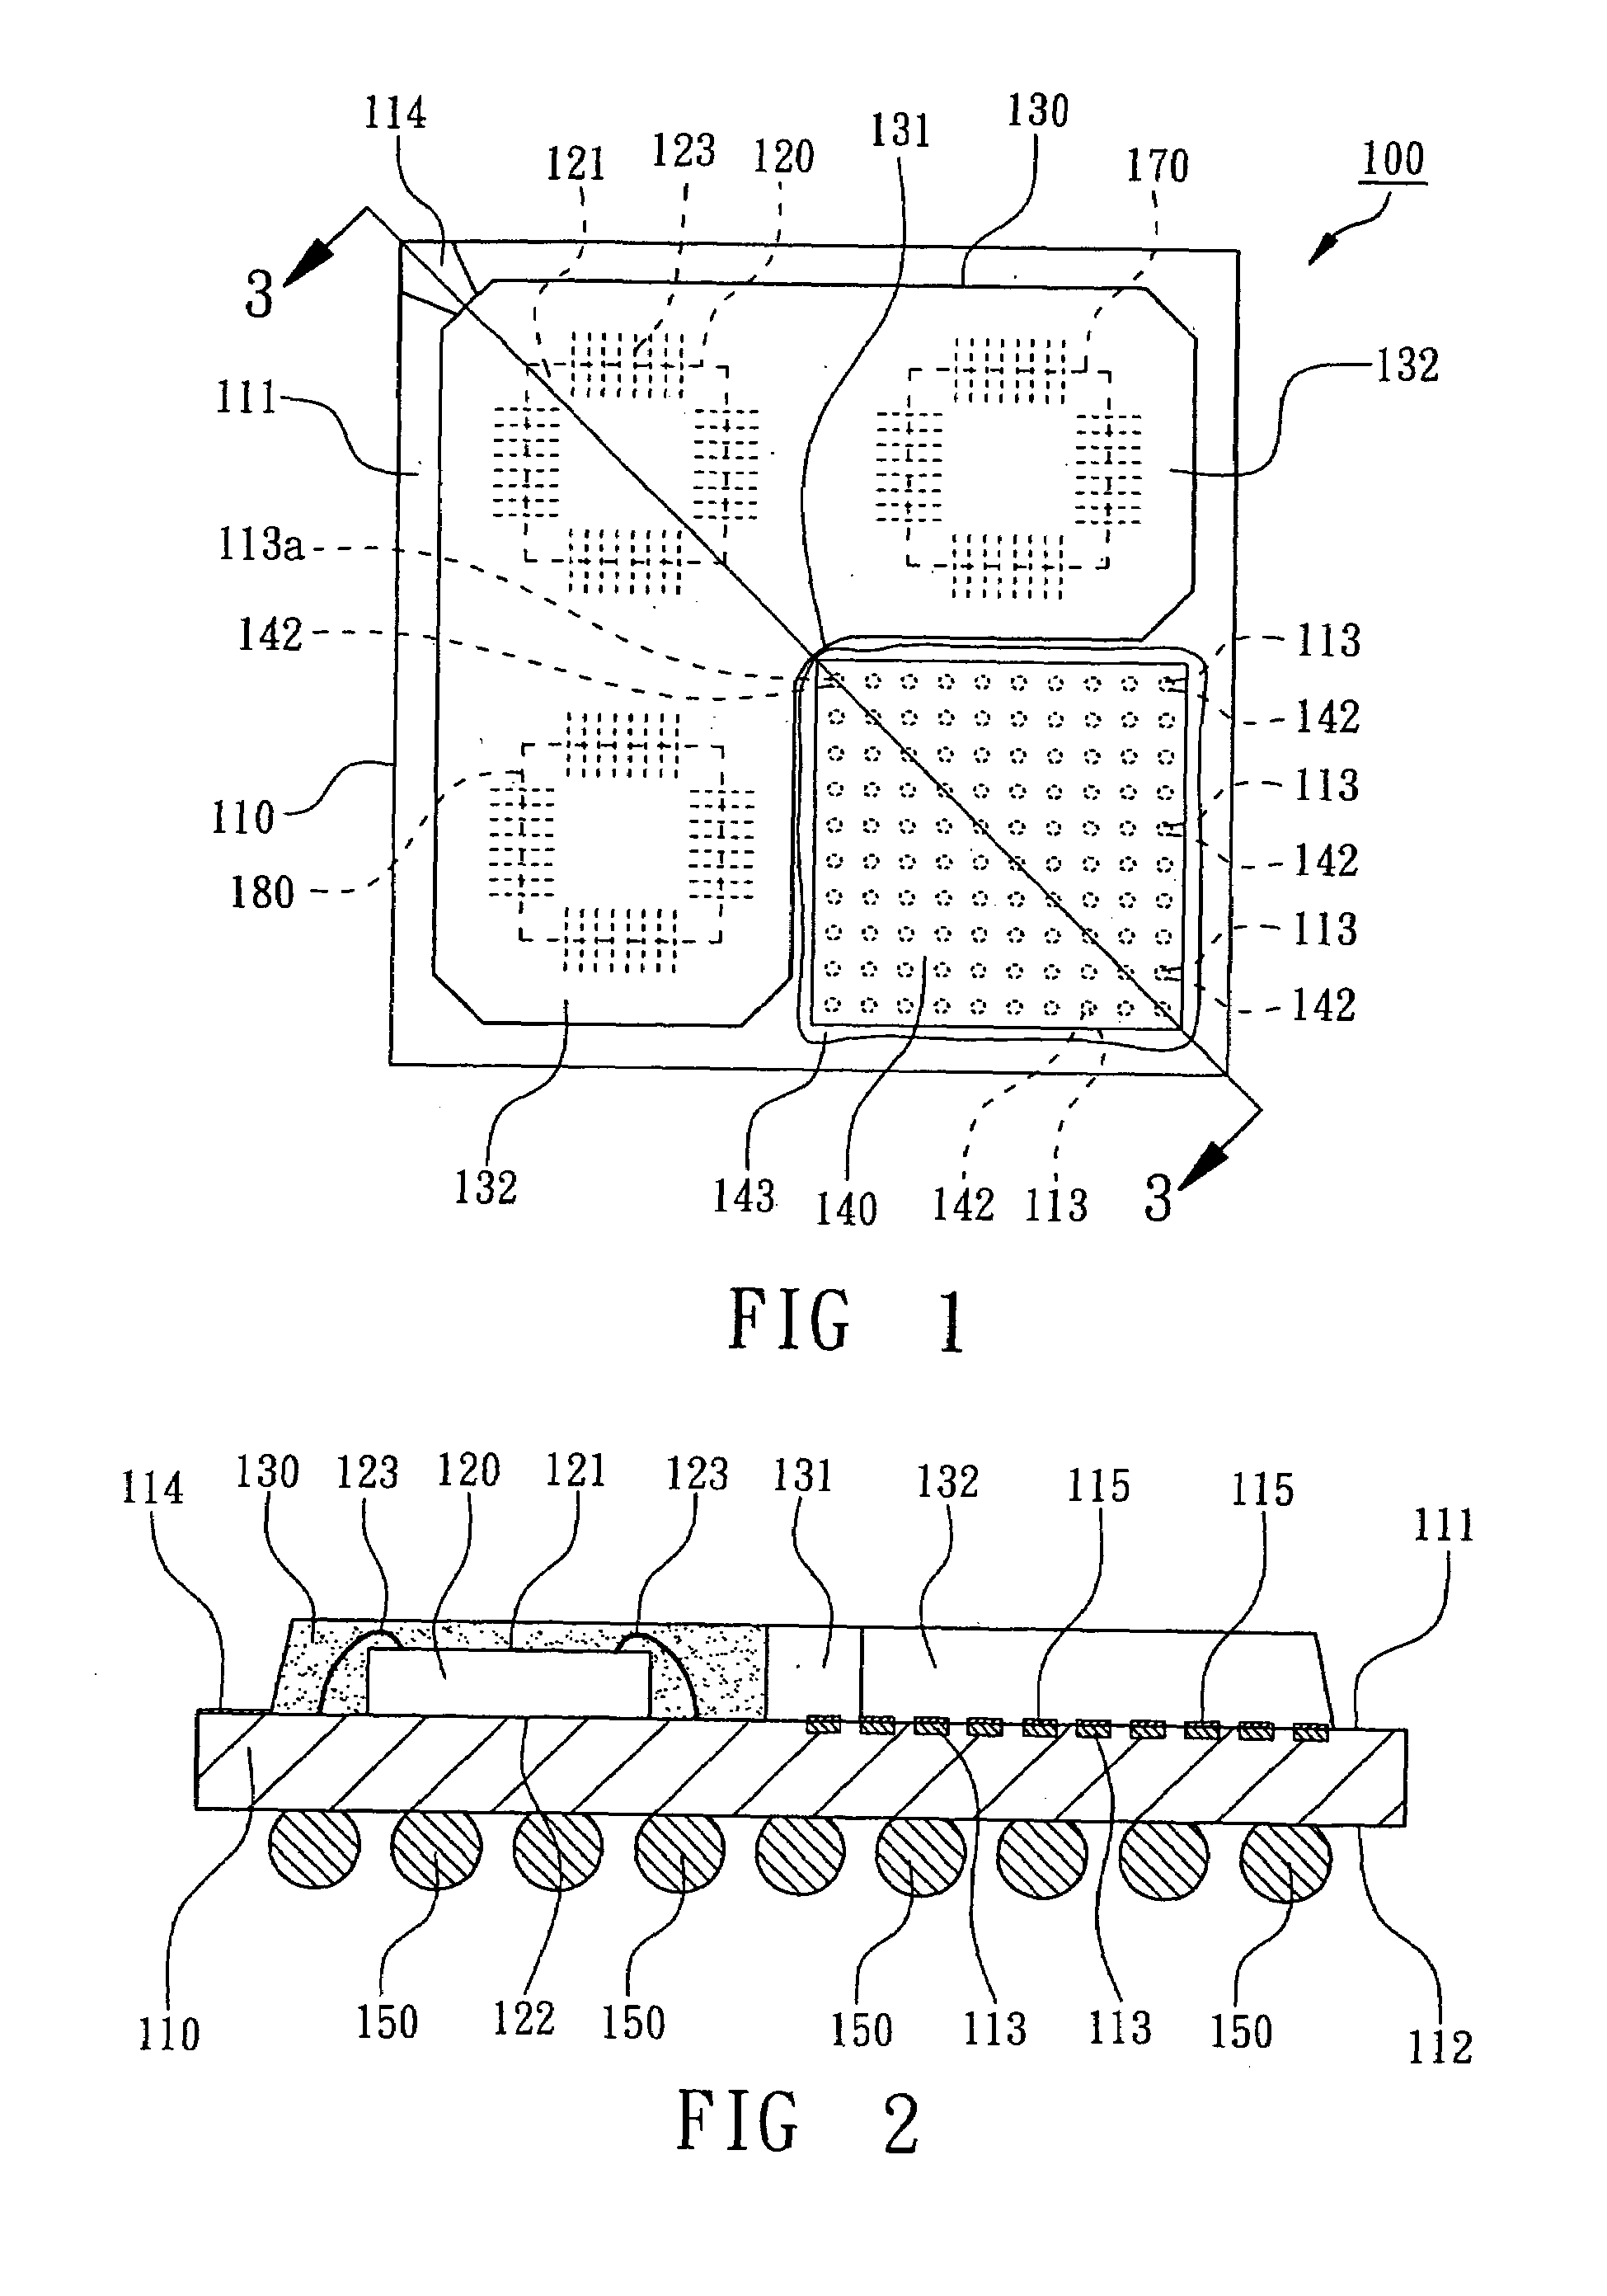 Multi-chip package combining wire-bonding and flip-chip configuration